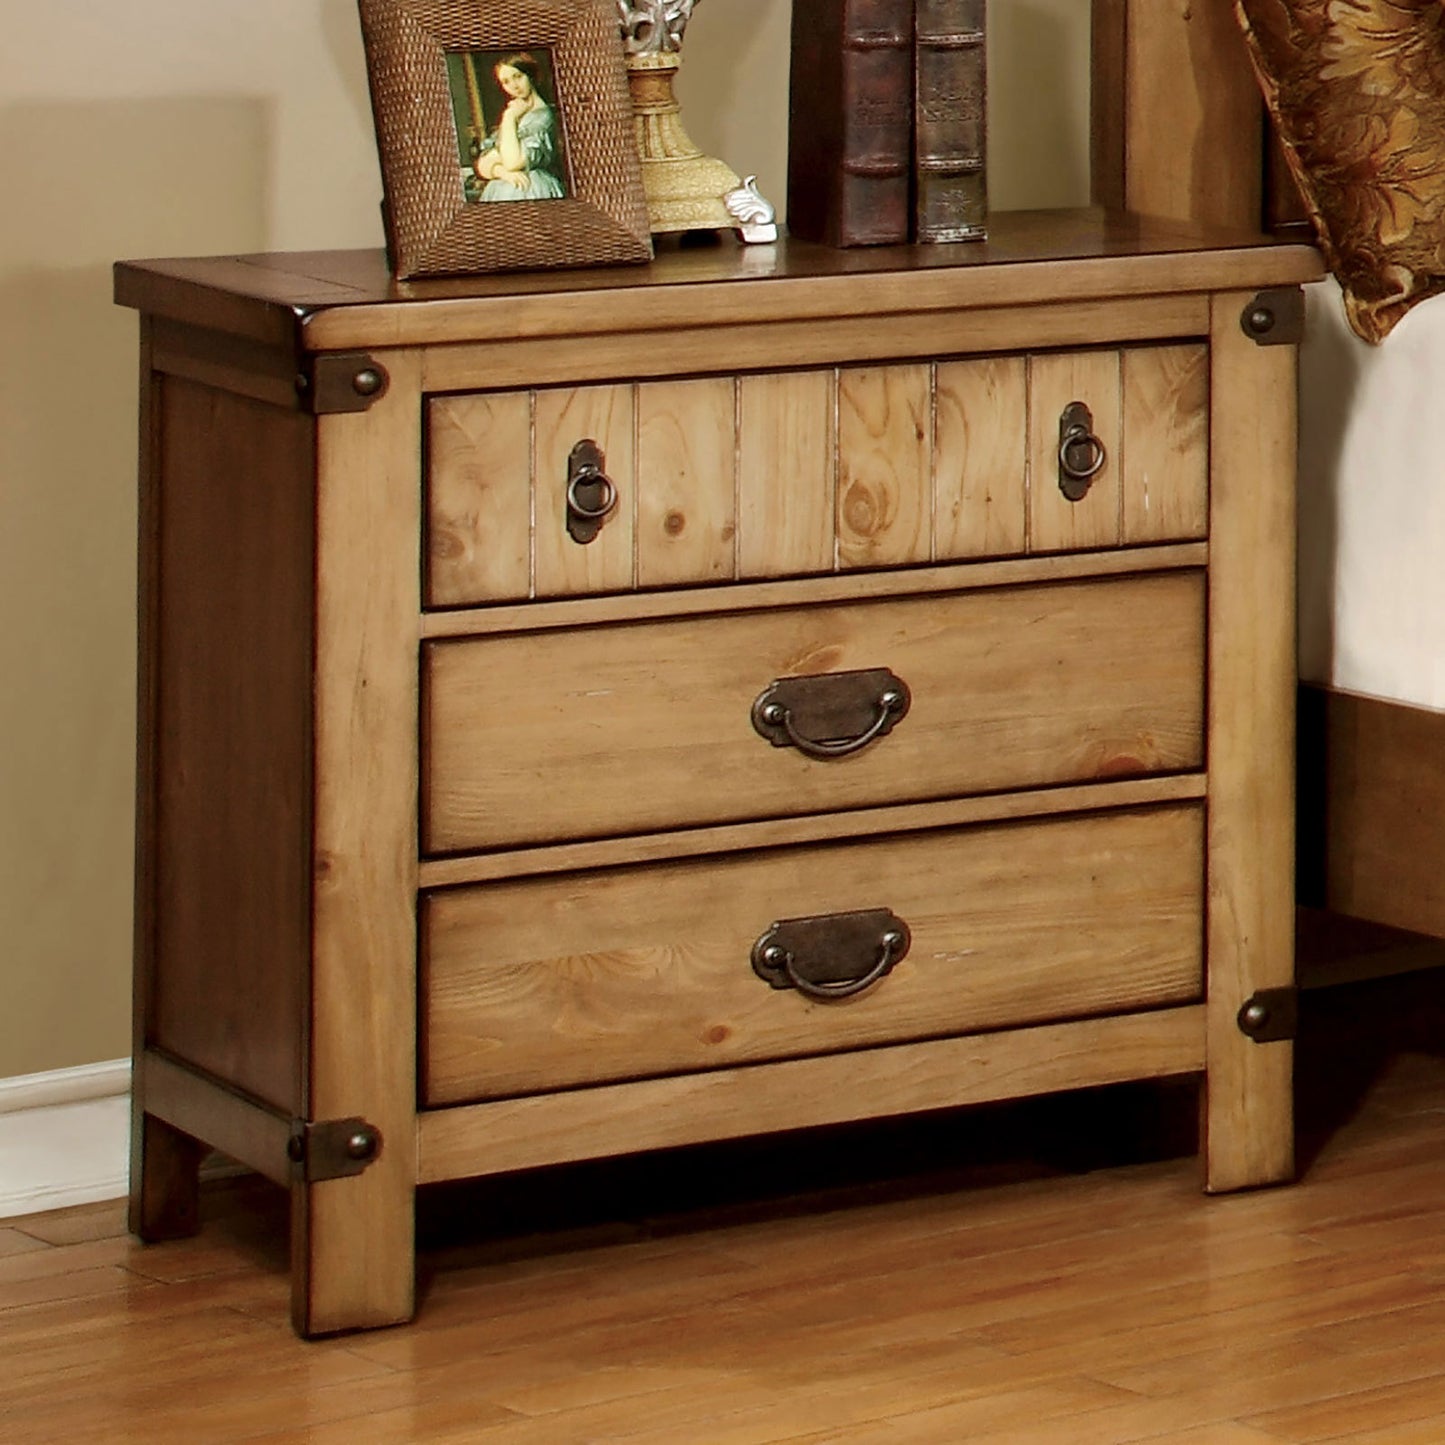 Cottage Style Weathered Elm 1pc Nightstand Ball Bearing Metal Glide USB Charger/Power Outlet In Night Stand Top Drawer Bedroom Bedside Table